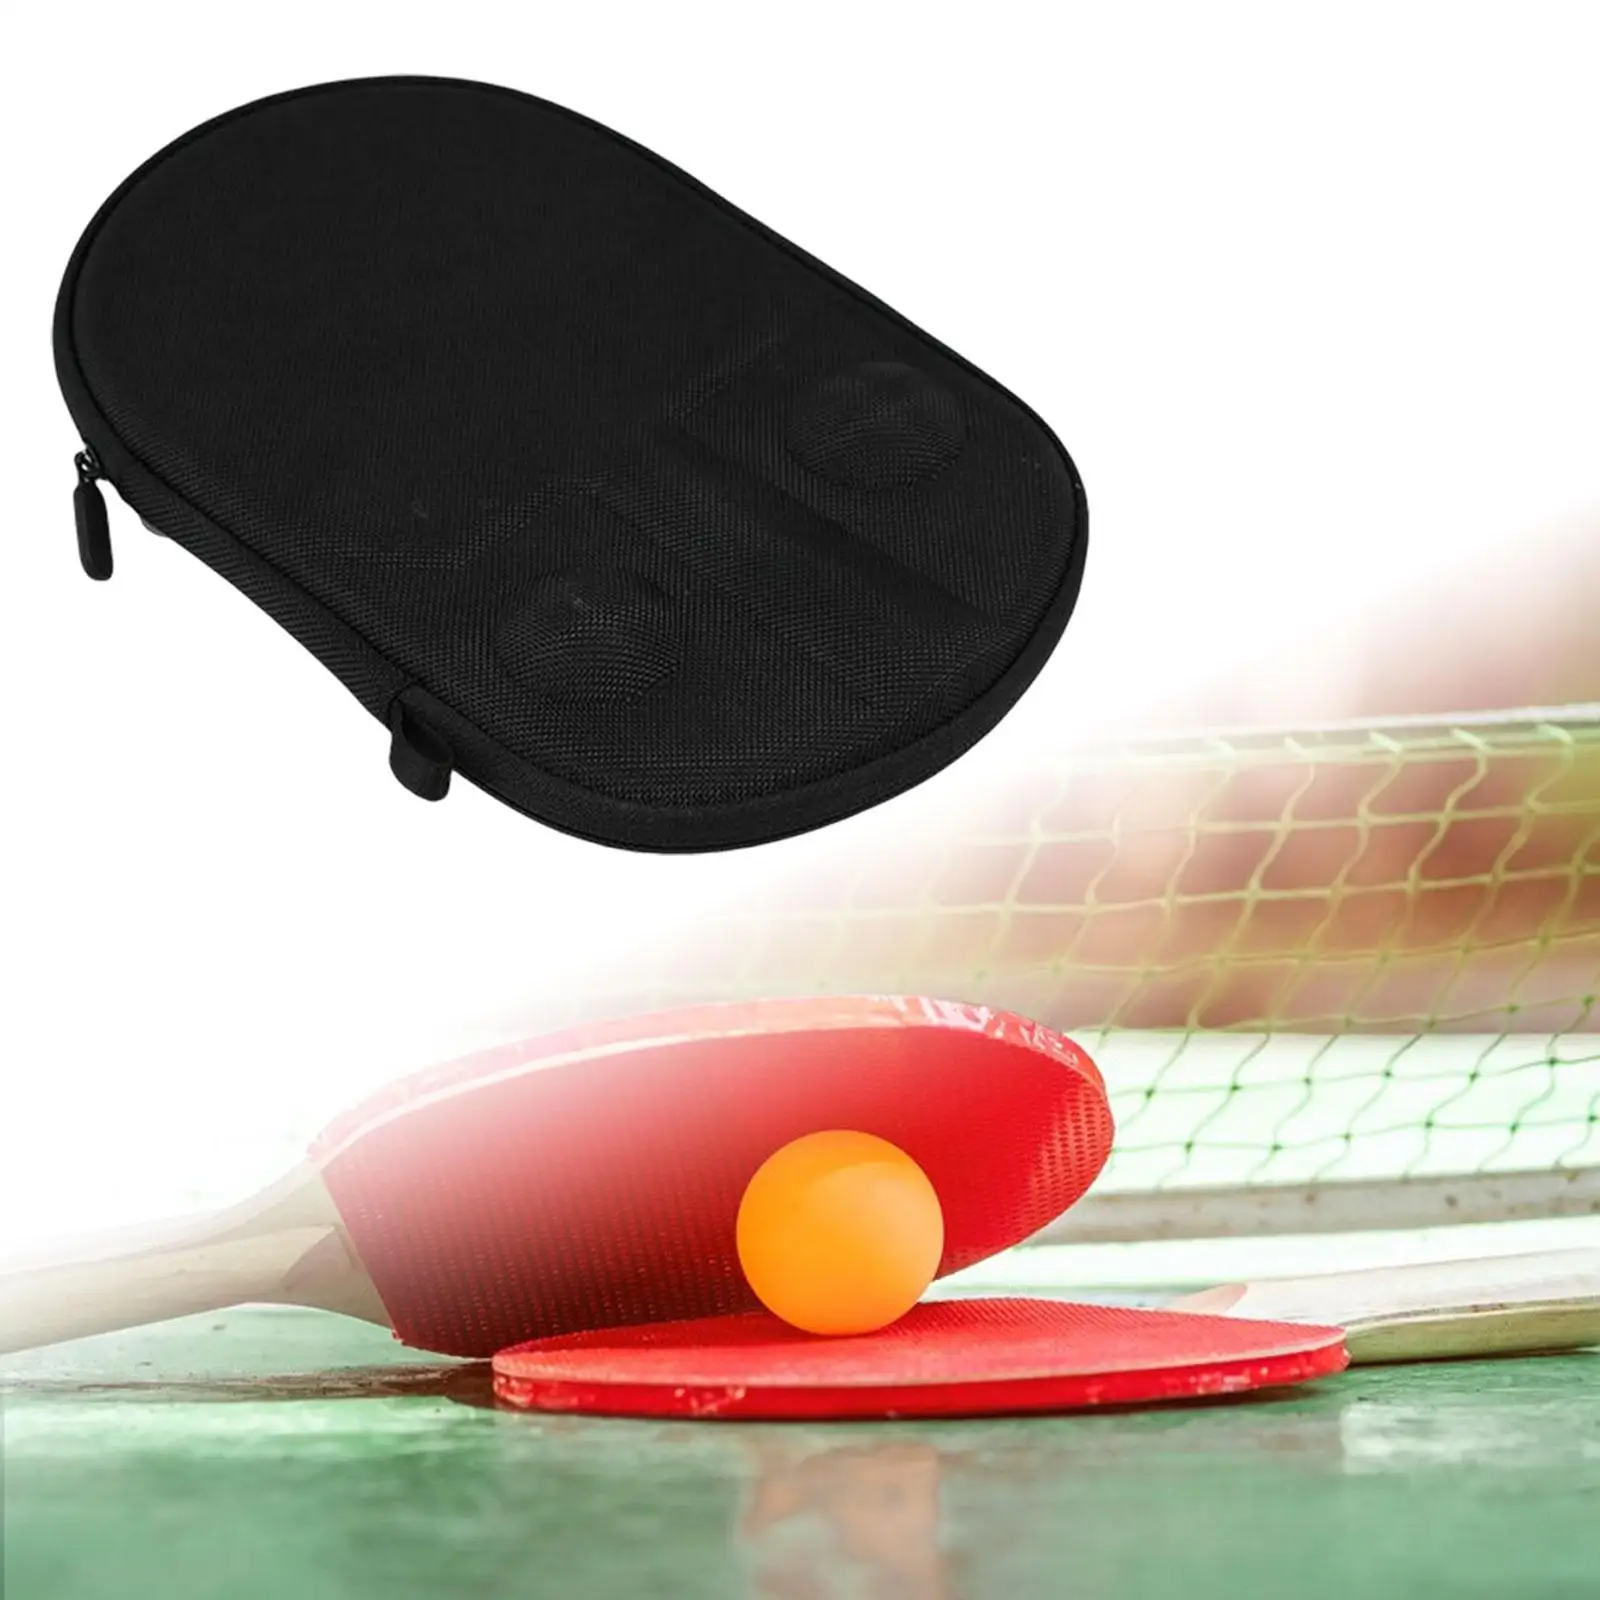 Table Tennis Racket Bag Hold 1 Racket and two balls Wear Resistant for Outdoor